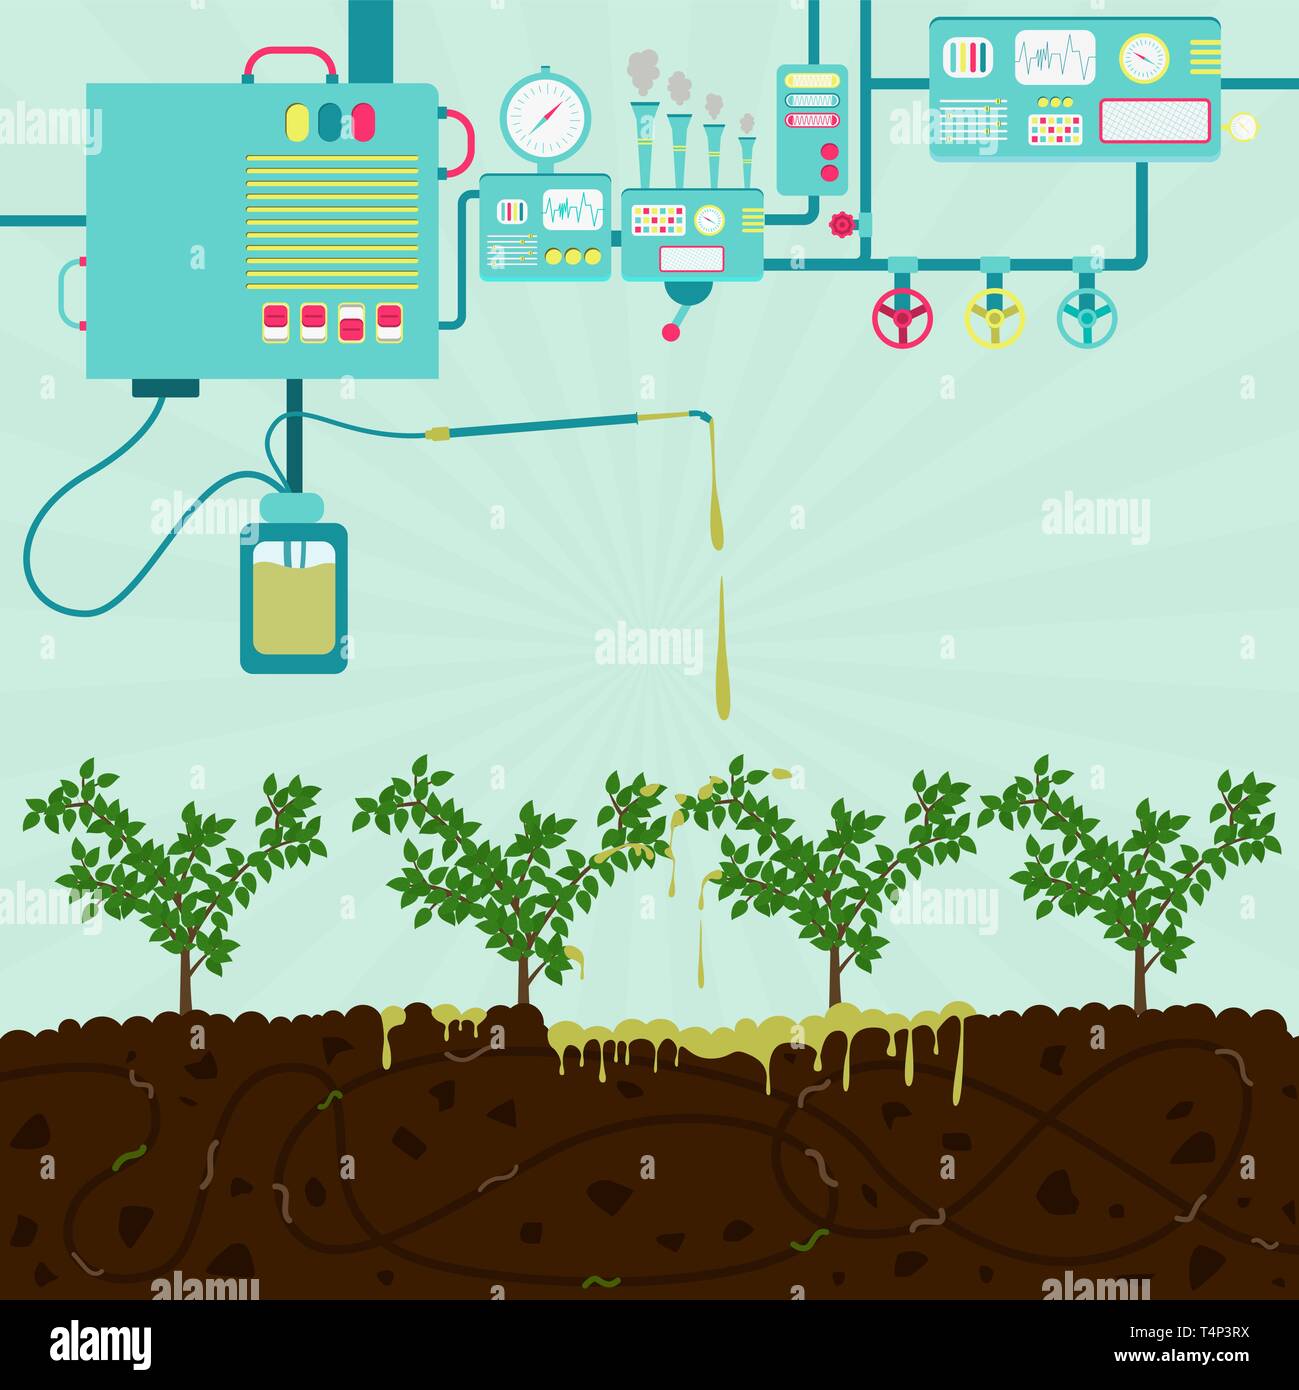 Chemical plant producing toxic product. Toxic product polluting planting and soil. Composting process with organic matter, microorganisms and earthwor Stock Vector